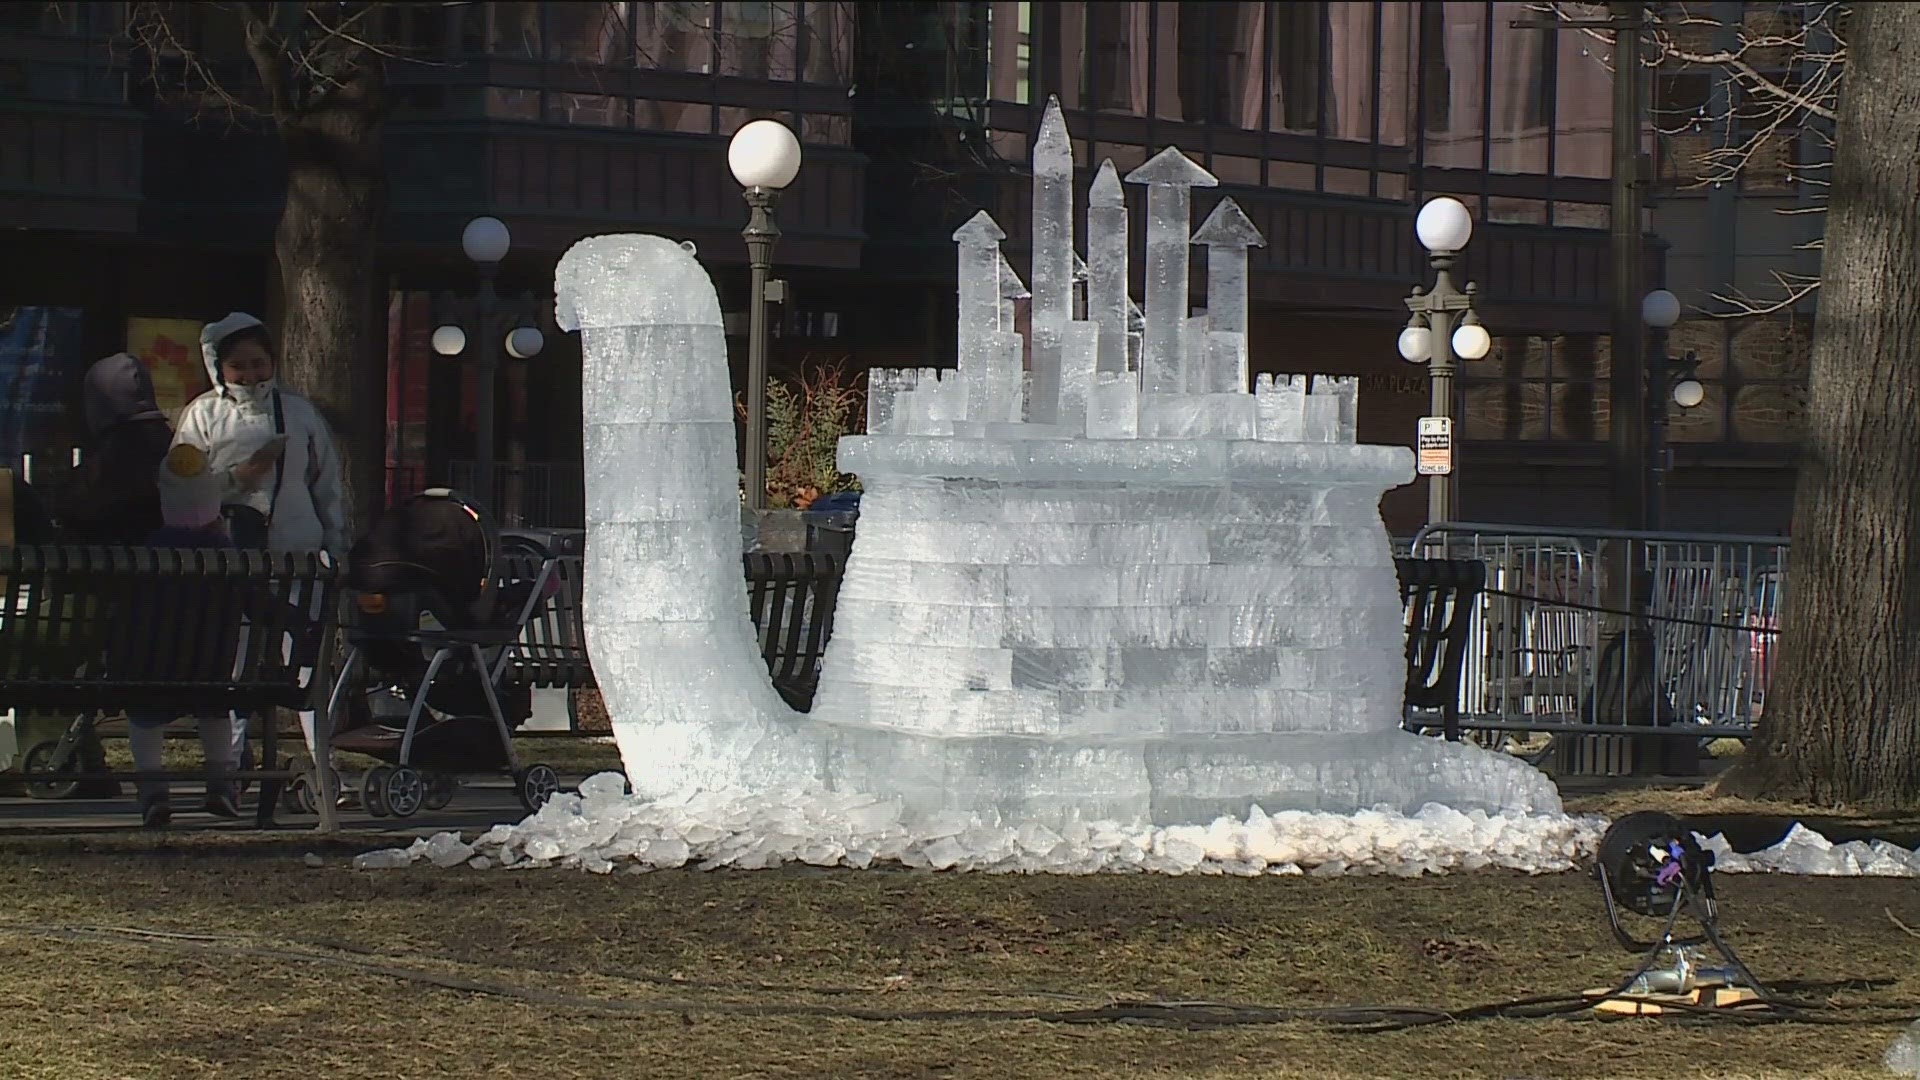 Ice sculptures of a hockey goalie, mermaid, monster, orchid and rose are ready for viewing in Rice Park.